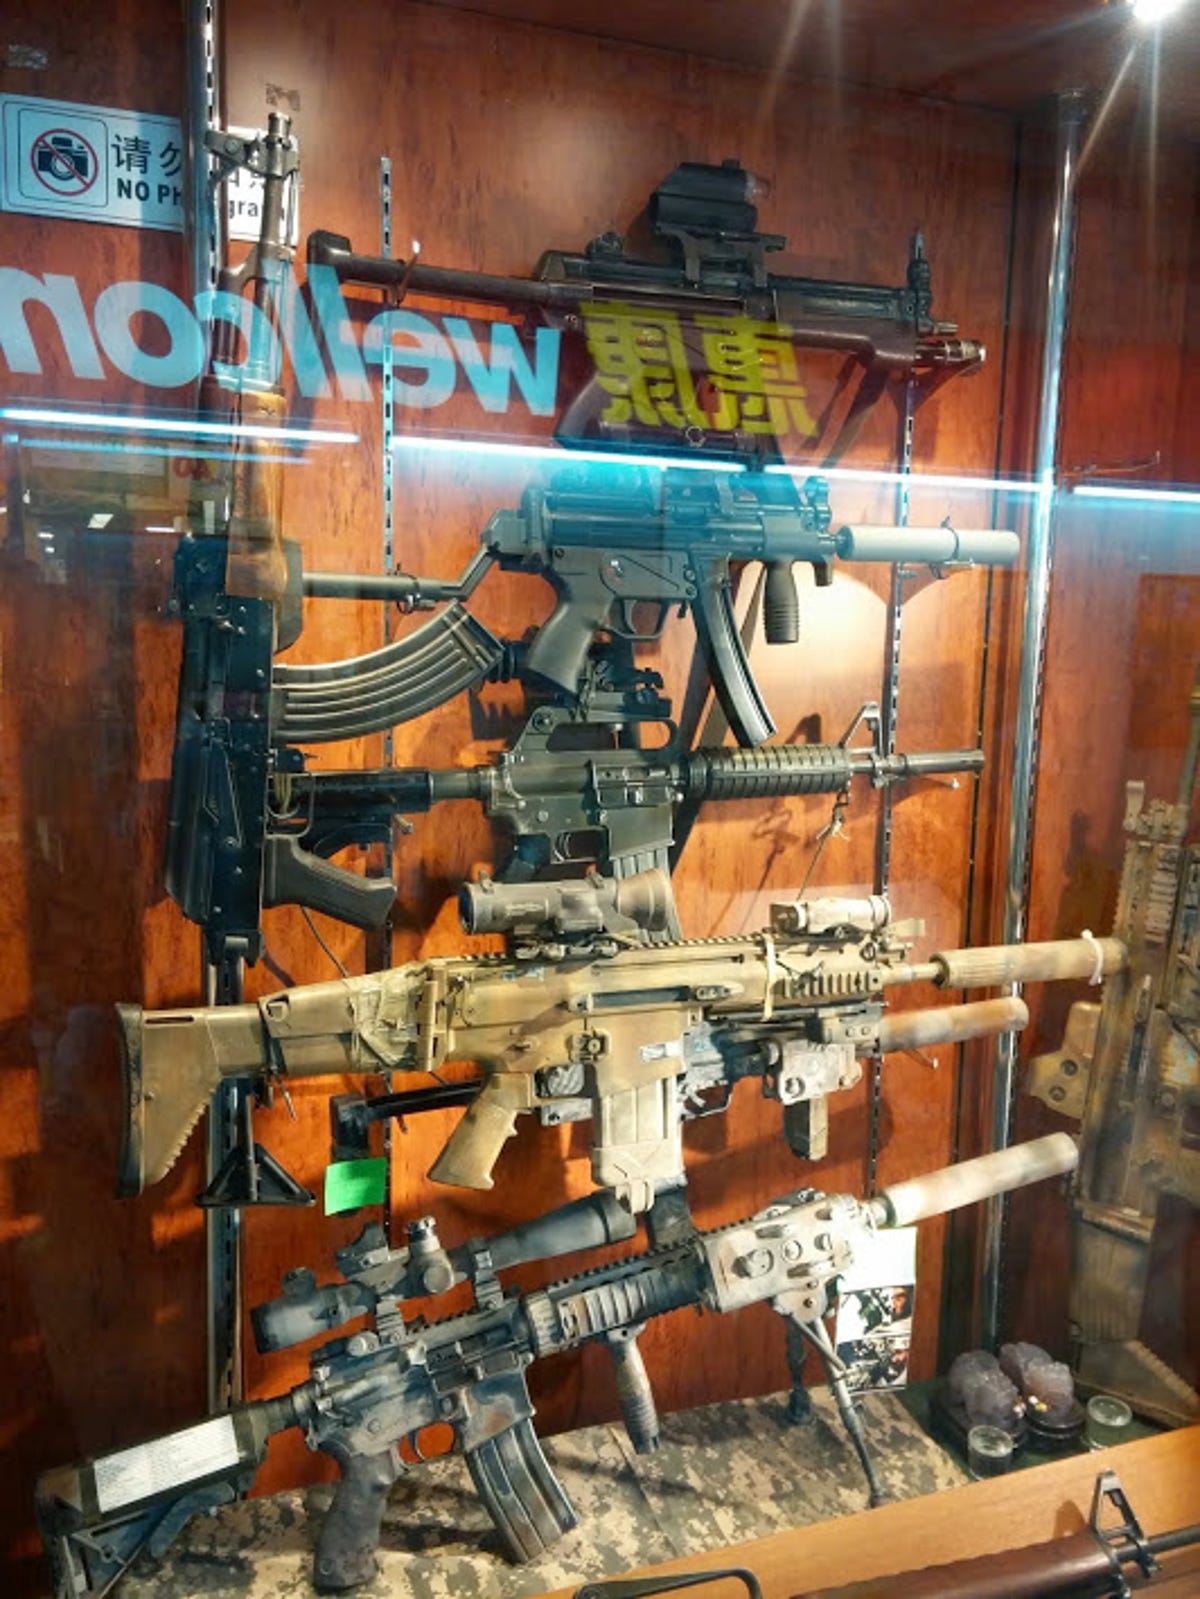 Incredibly detailed gun replicas for the serious enthusiast at Kwong Wa Street